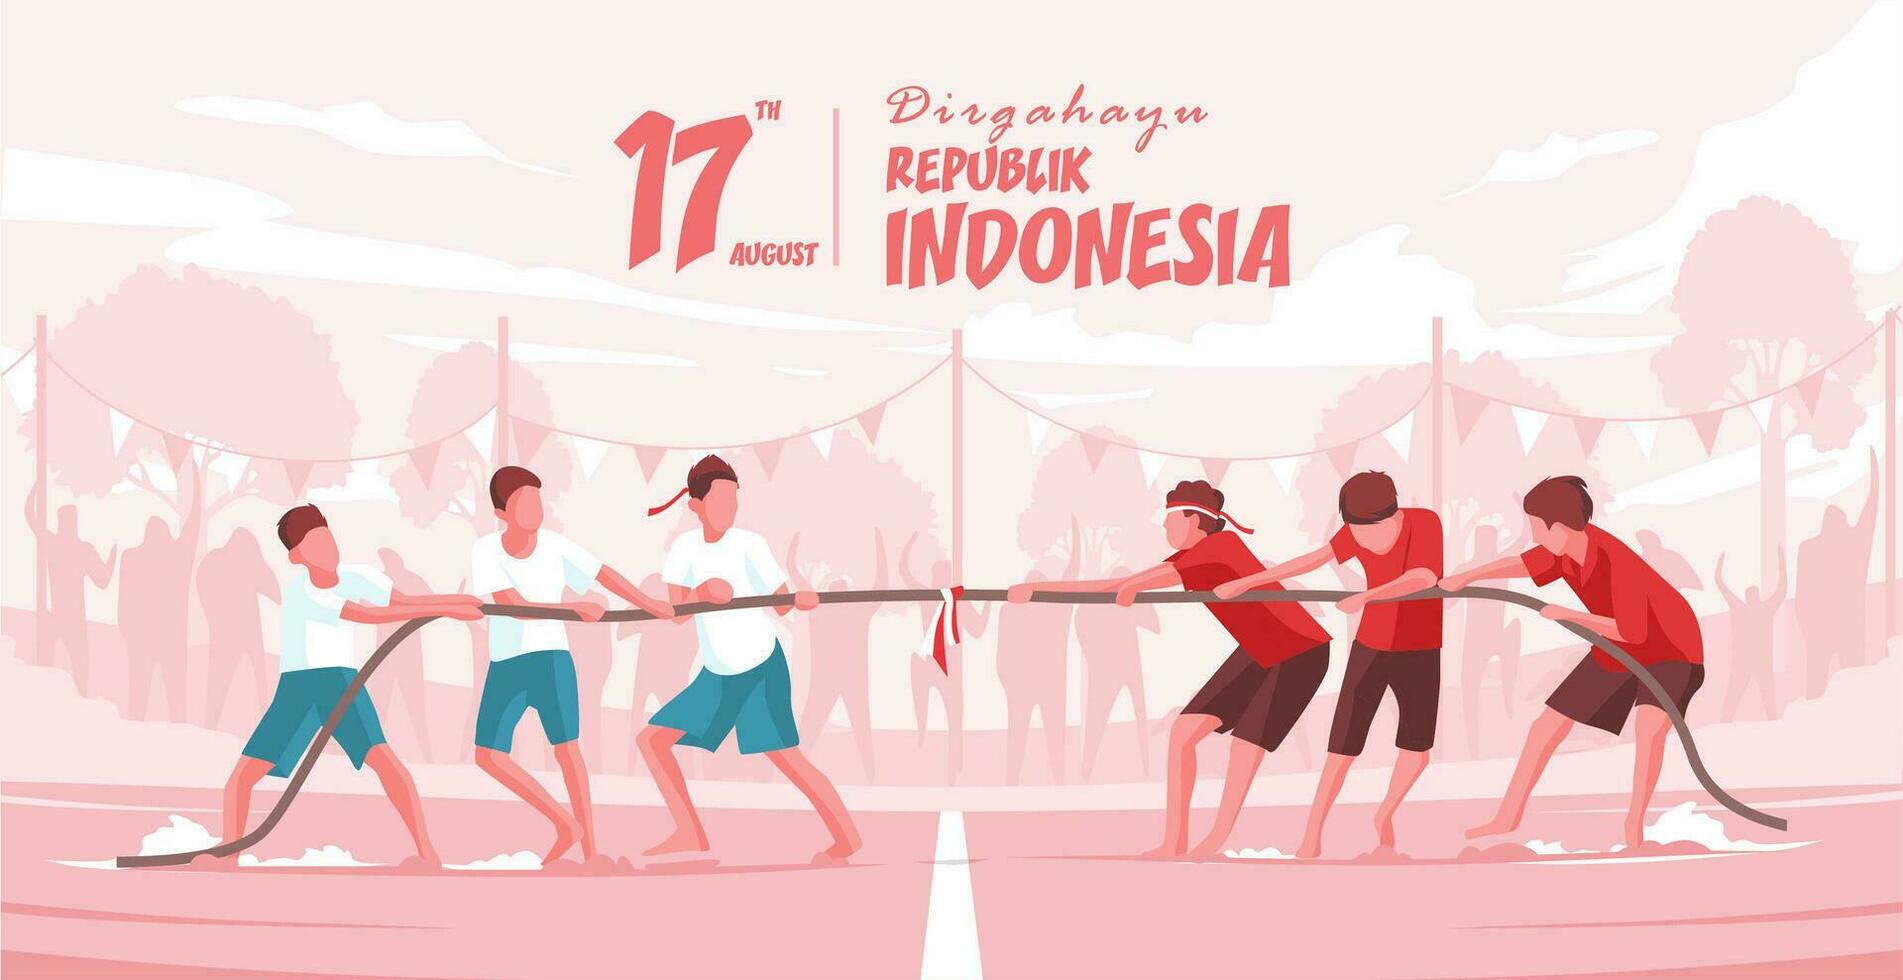 Indonesia Independence Day 17th August Celebration With Tug Of War Competition vector